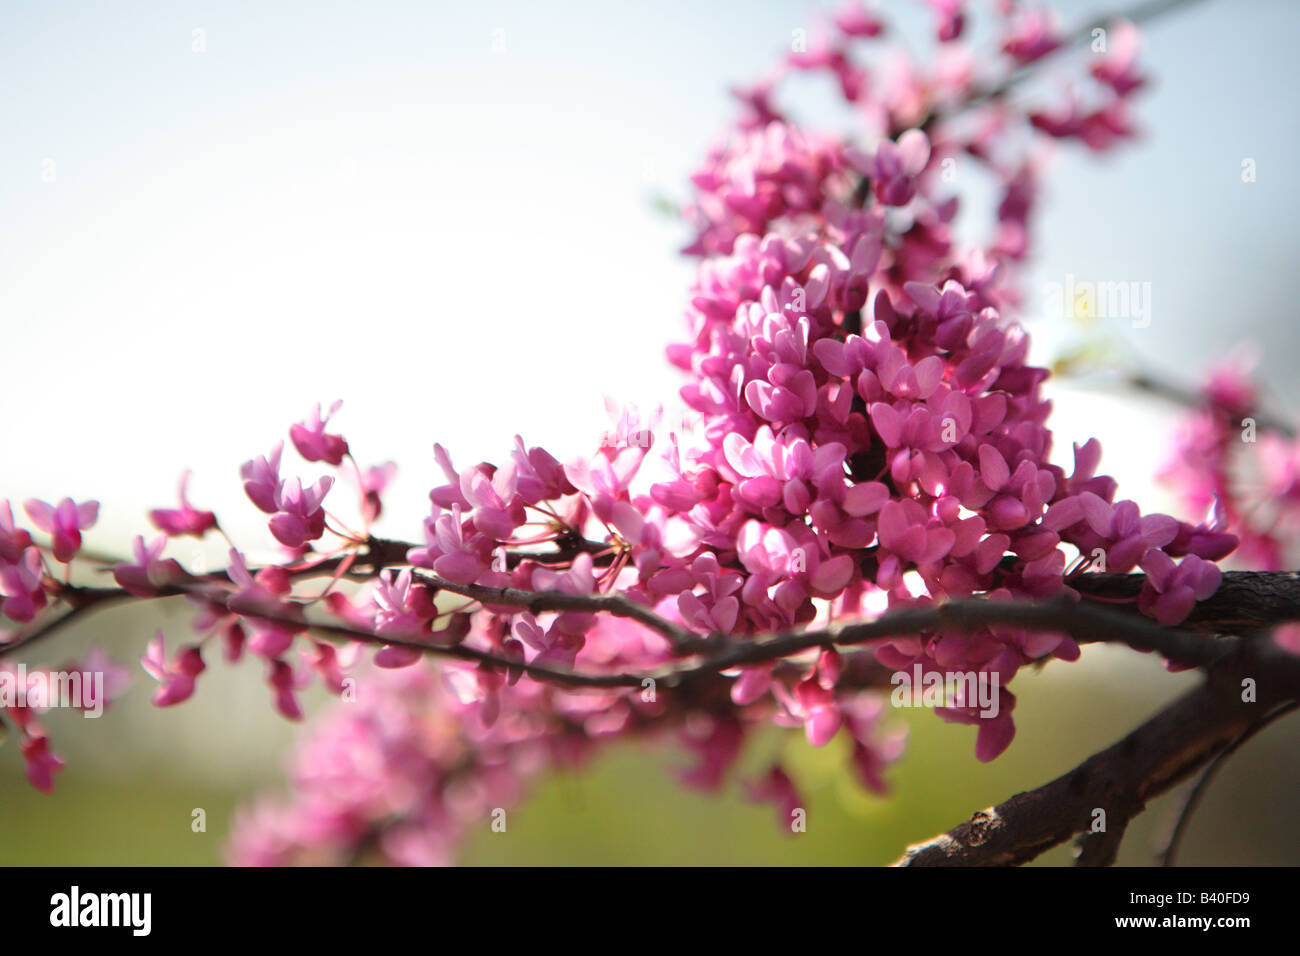 FLOWERING REDBUD TREE BRANCH CERCIS CANADENSIS IN SPRING IN NORTHERN ILLINOIS USA Stock Photo